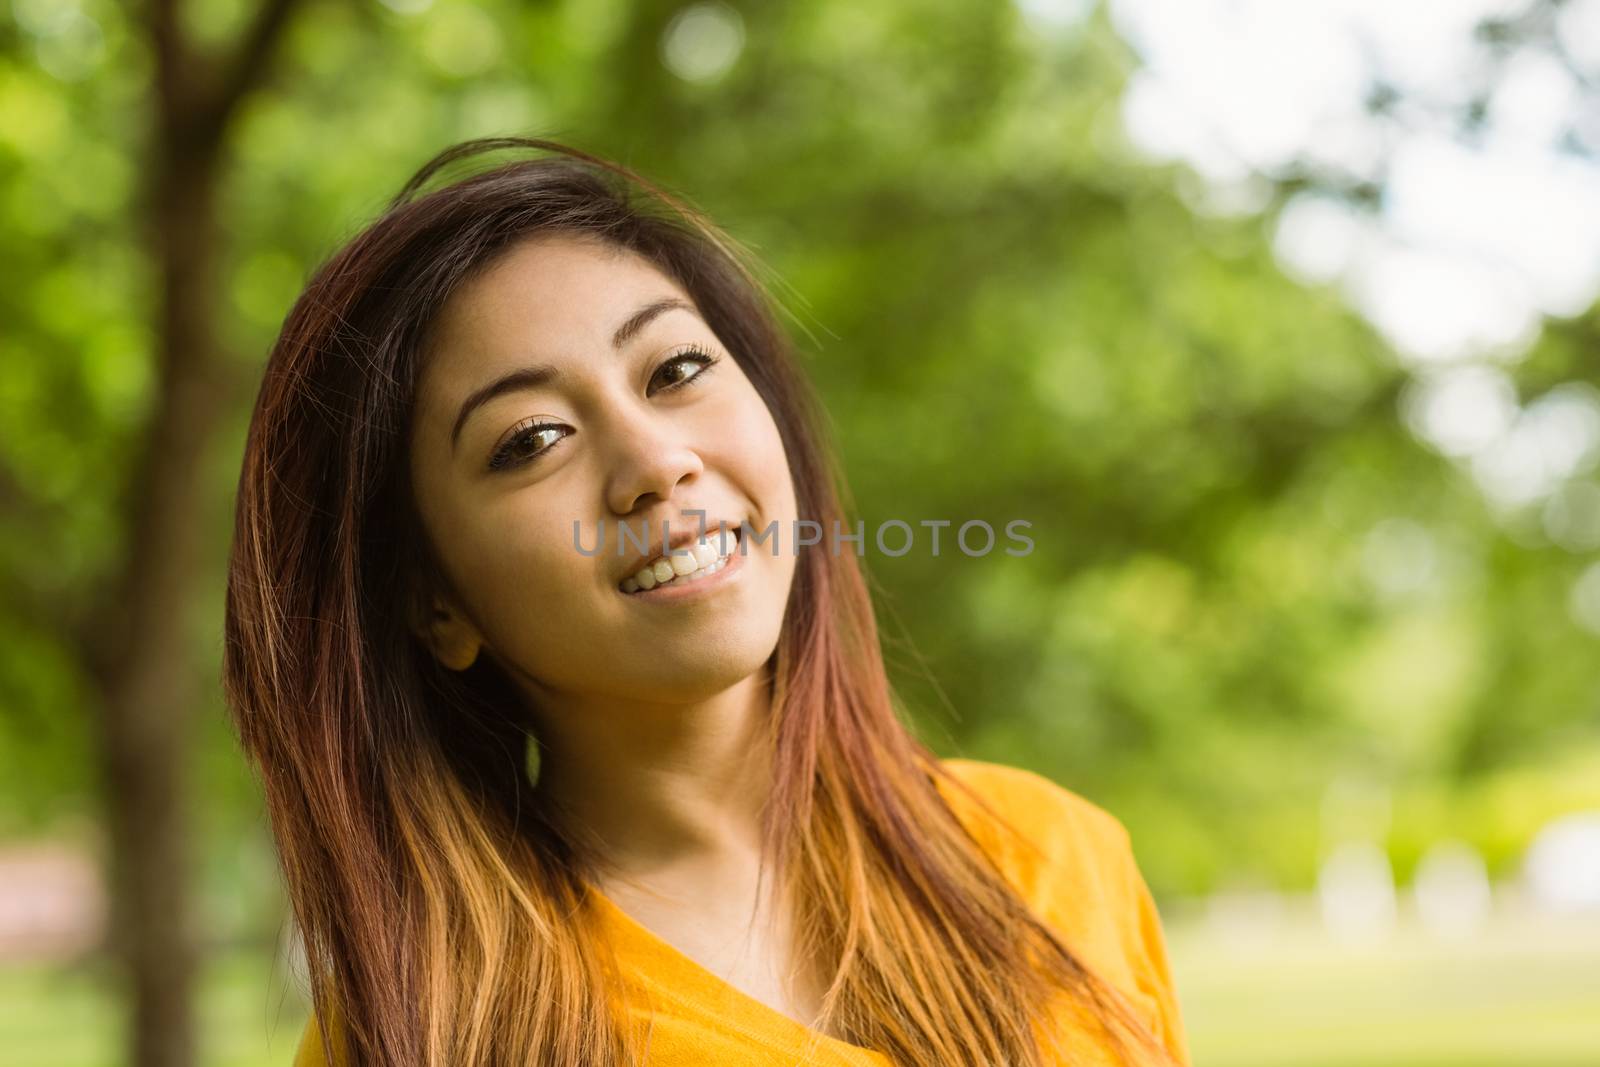 Close up portrait of beautiful young woman outdoors